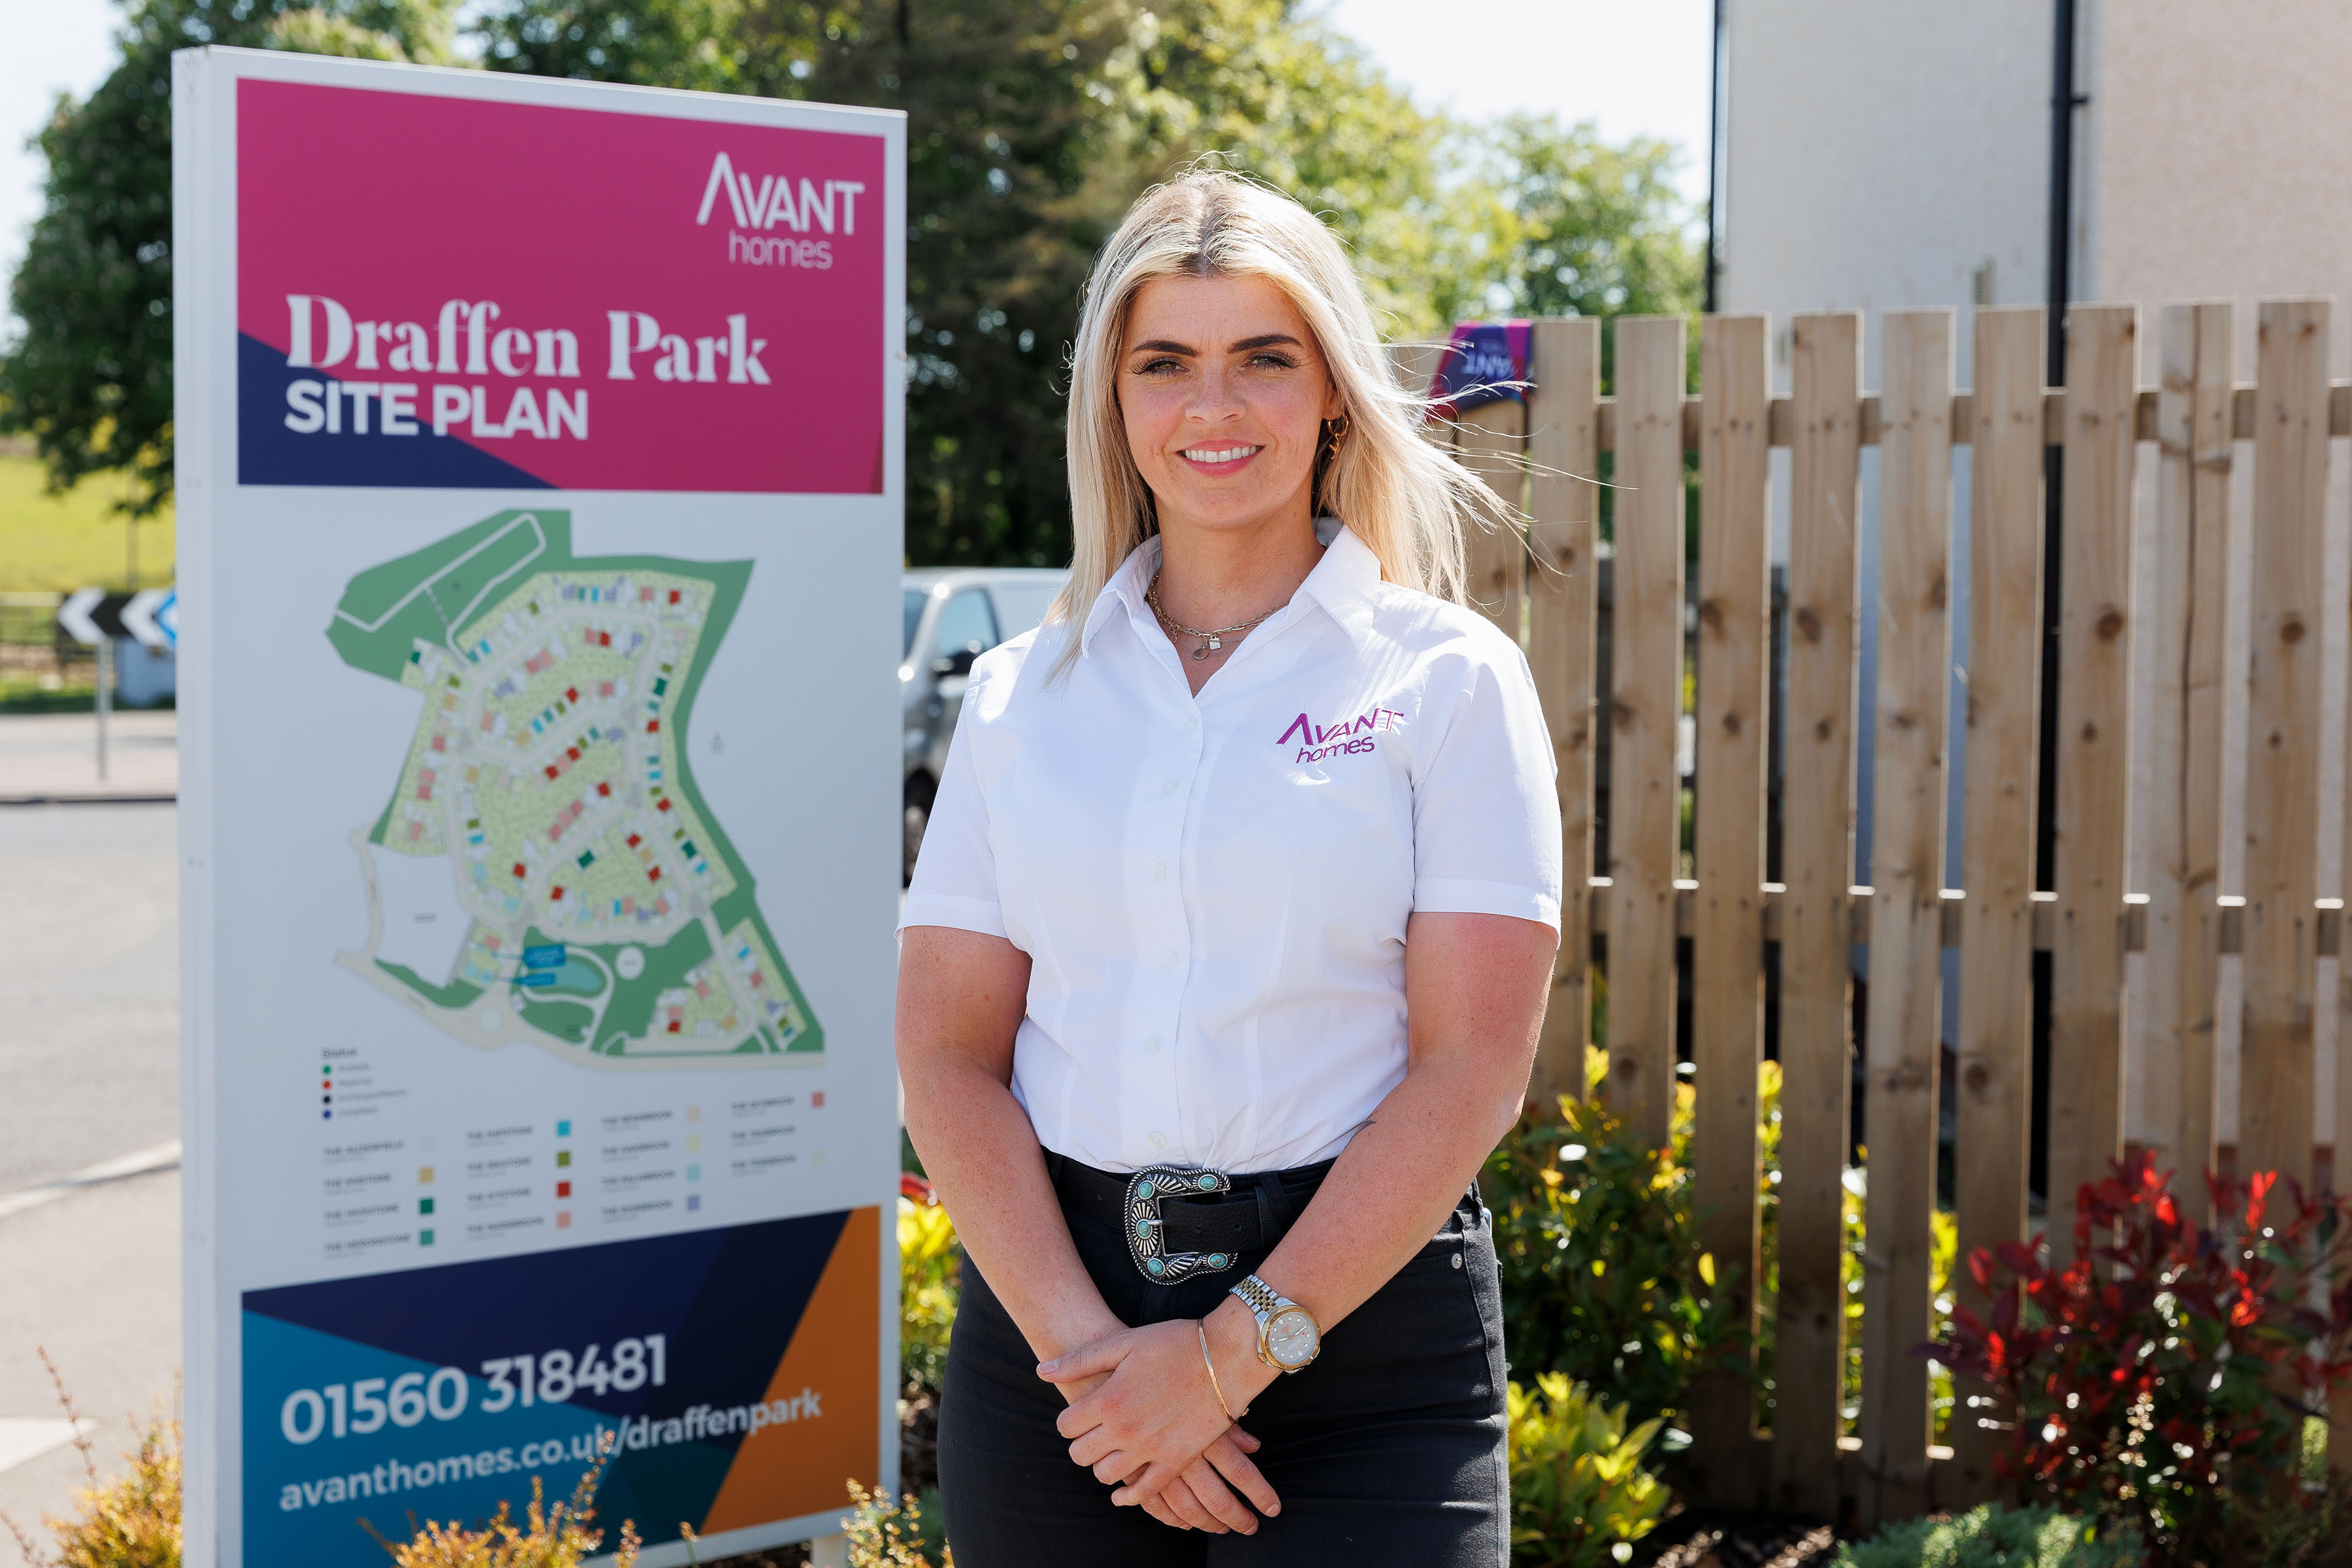 Avant Homes Scotland appoints Lynne Scullion as site manager at Draffen Park